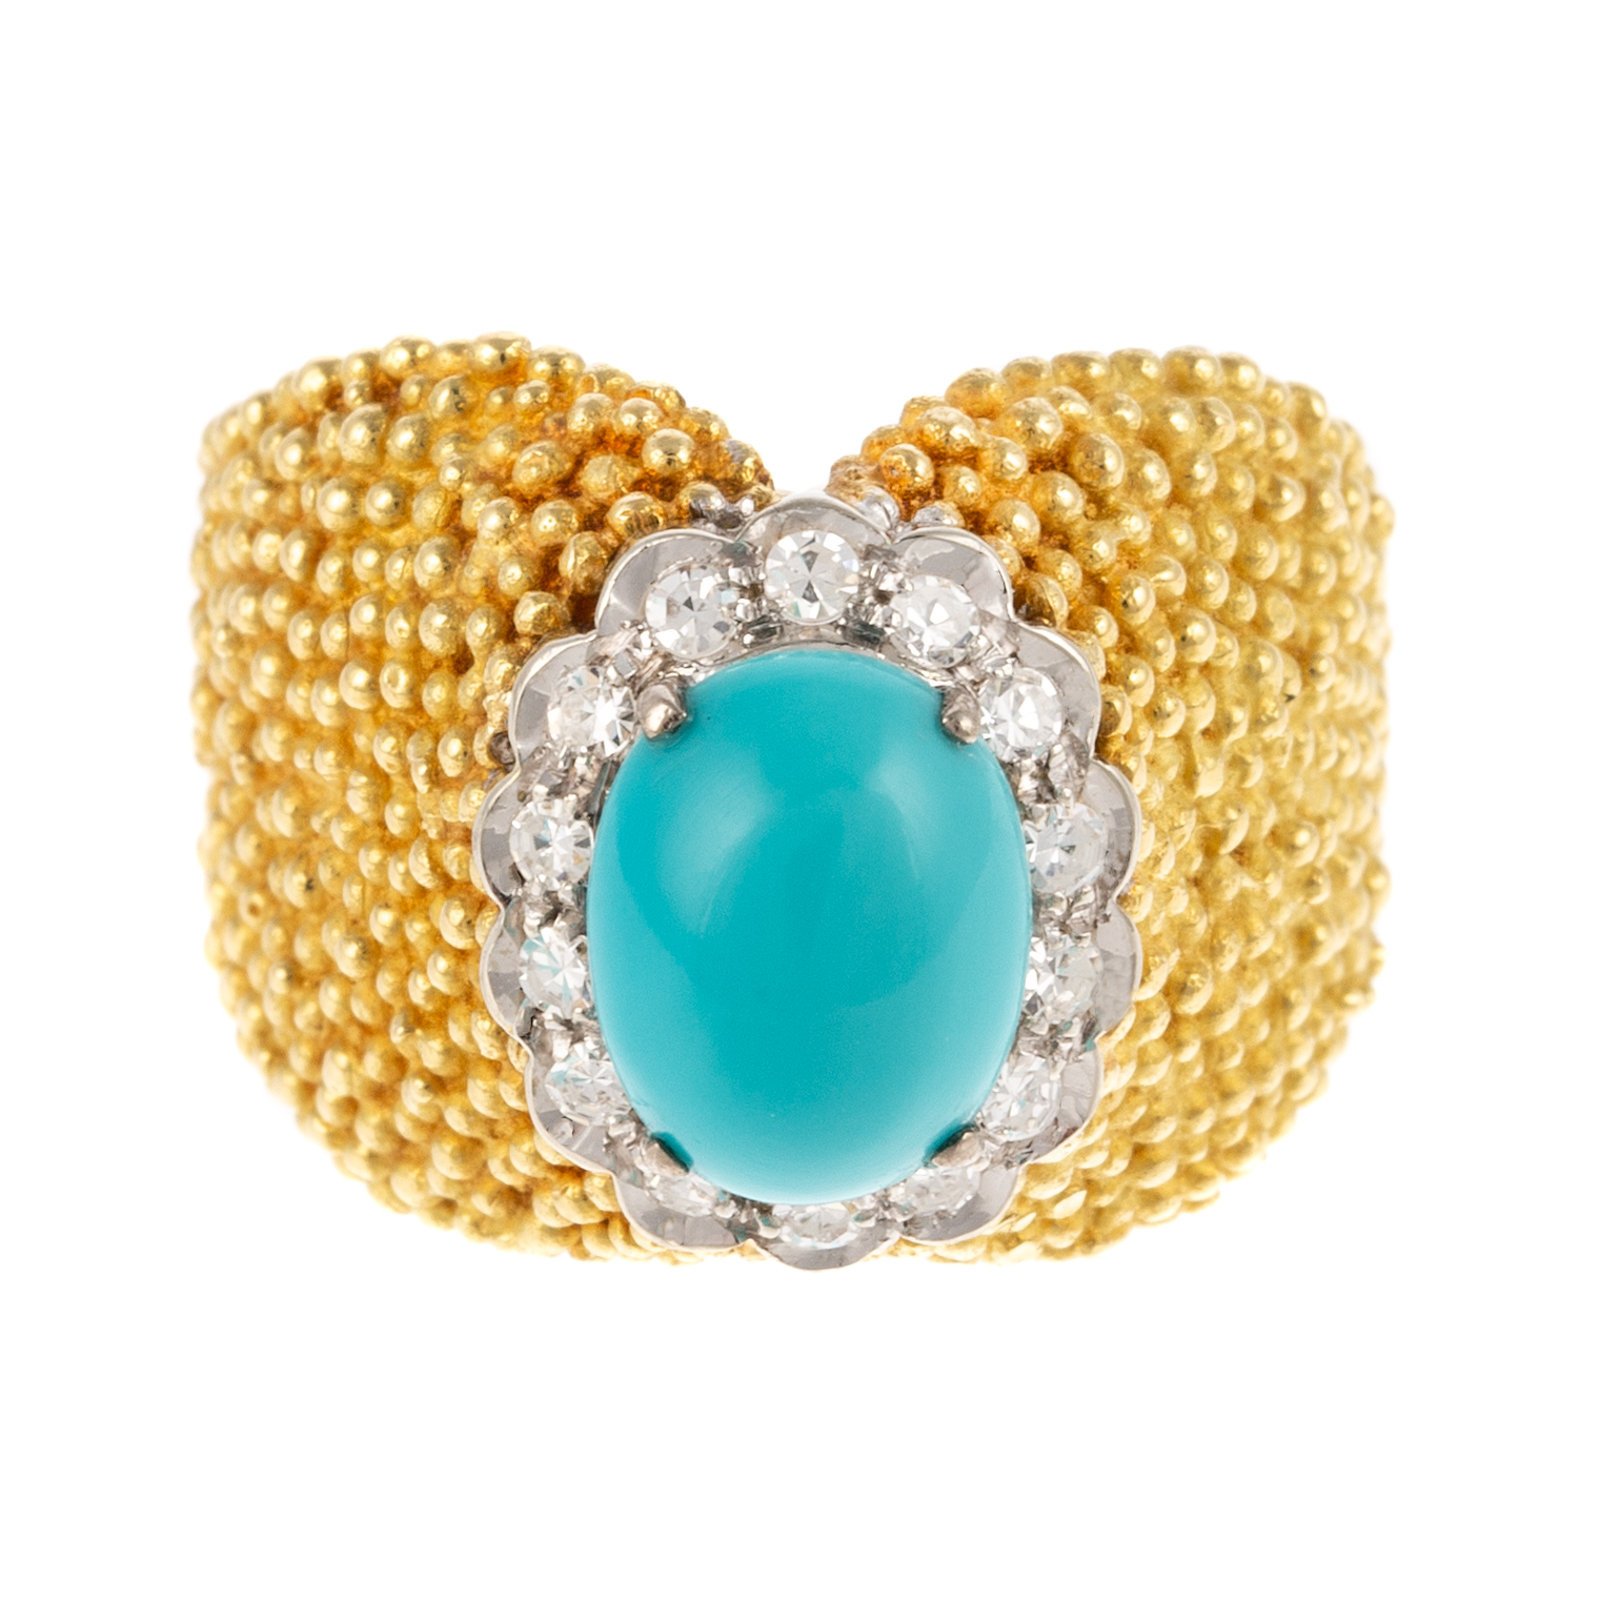 A TURQUOISE & DIAMOND RING IN 18K